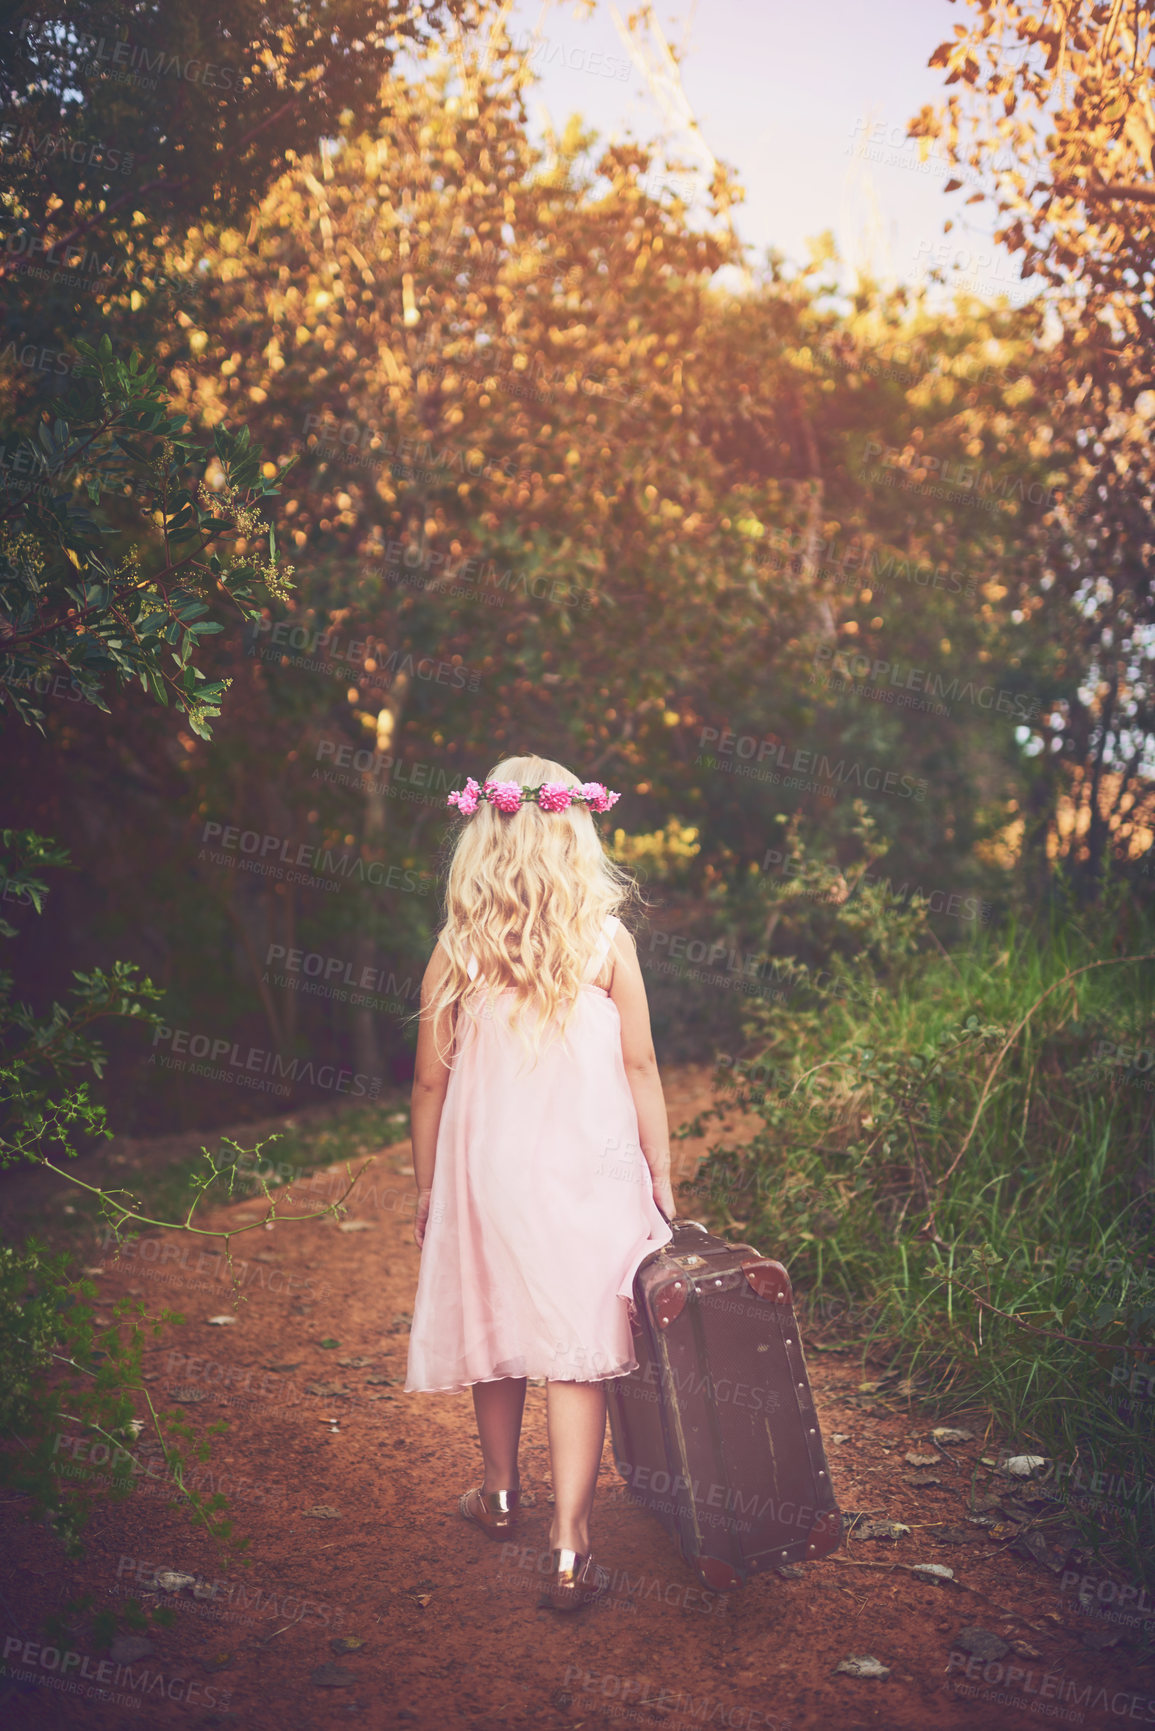 Buy stock photo Shot of a unrecognizable little girl walking with a suitcase on a dirt road outside in nature